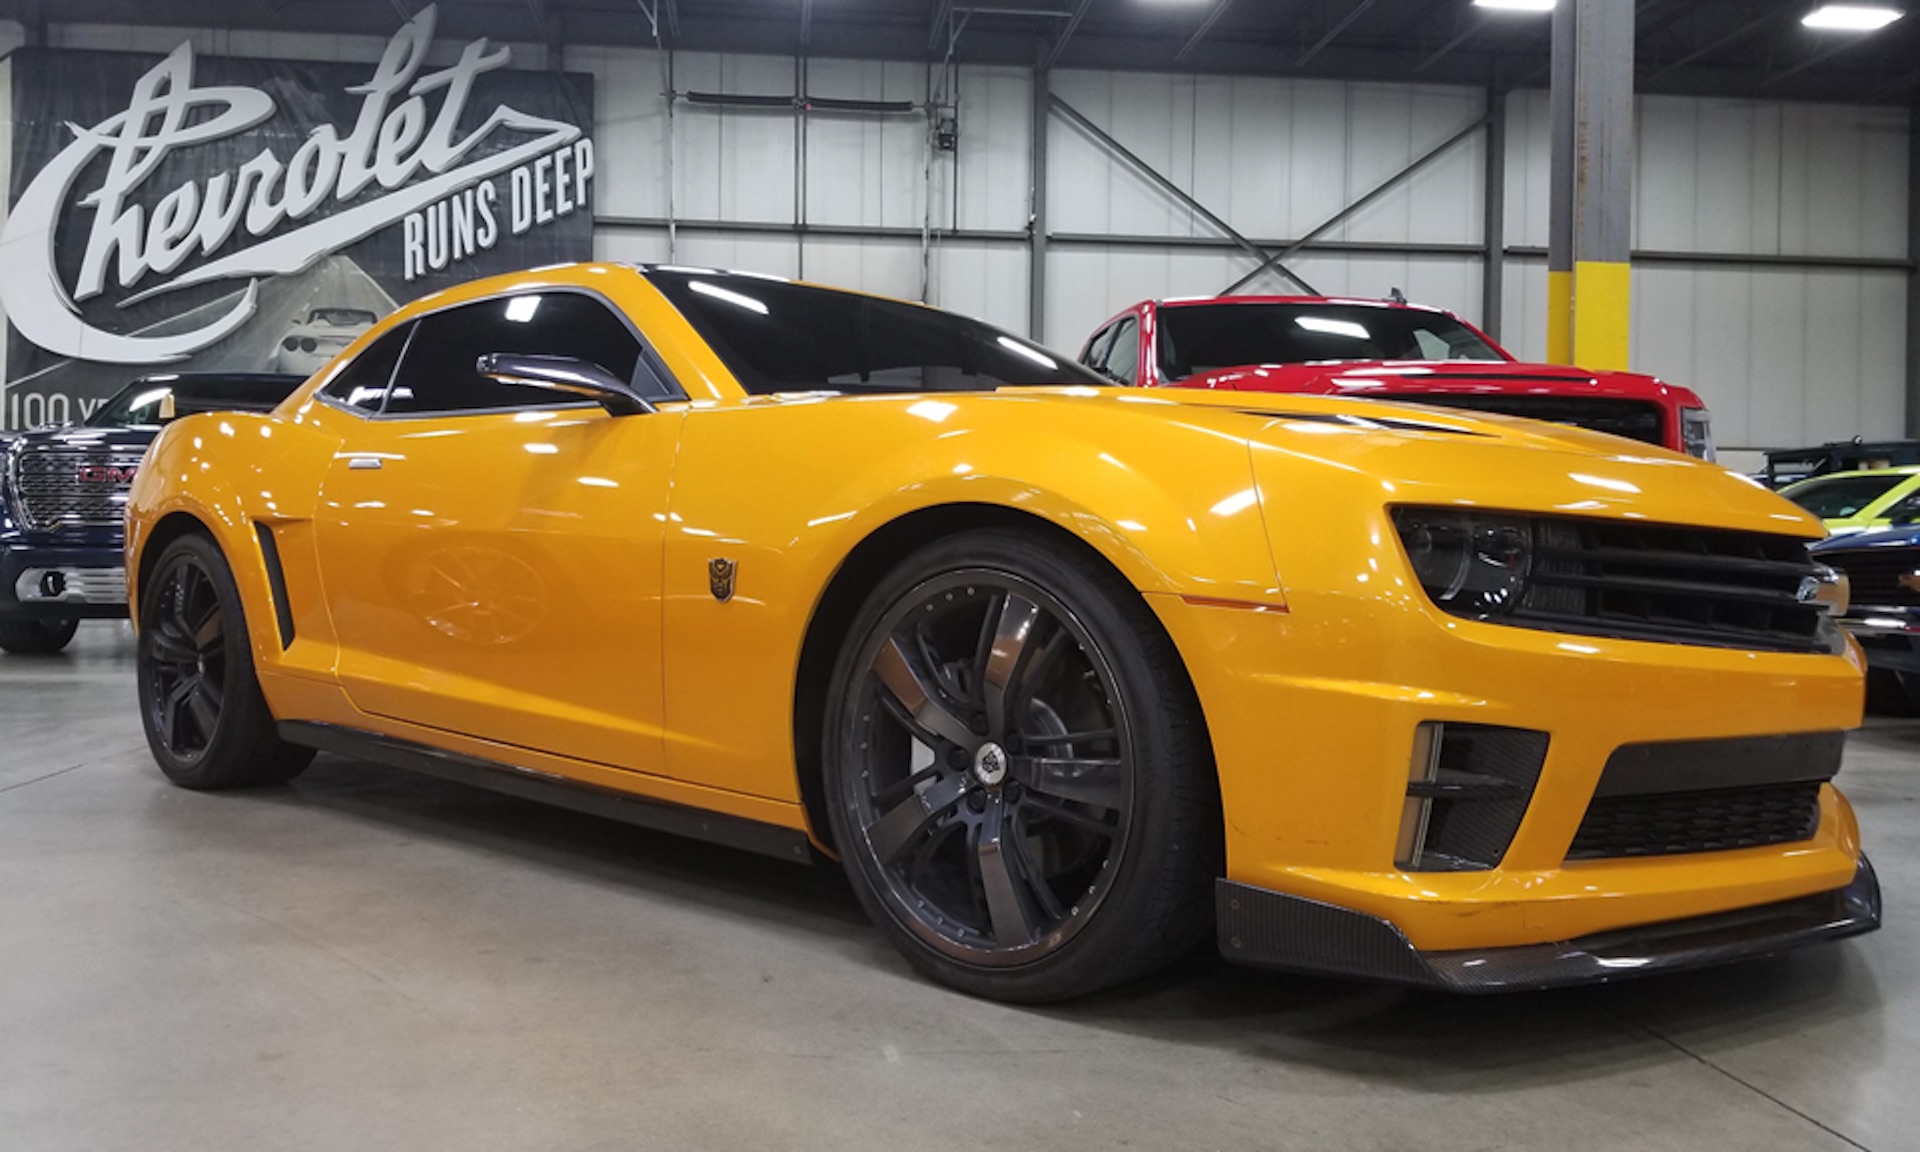 All 4 Bumblebee Camaros from Transformers films fetch 500,000 in group sale